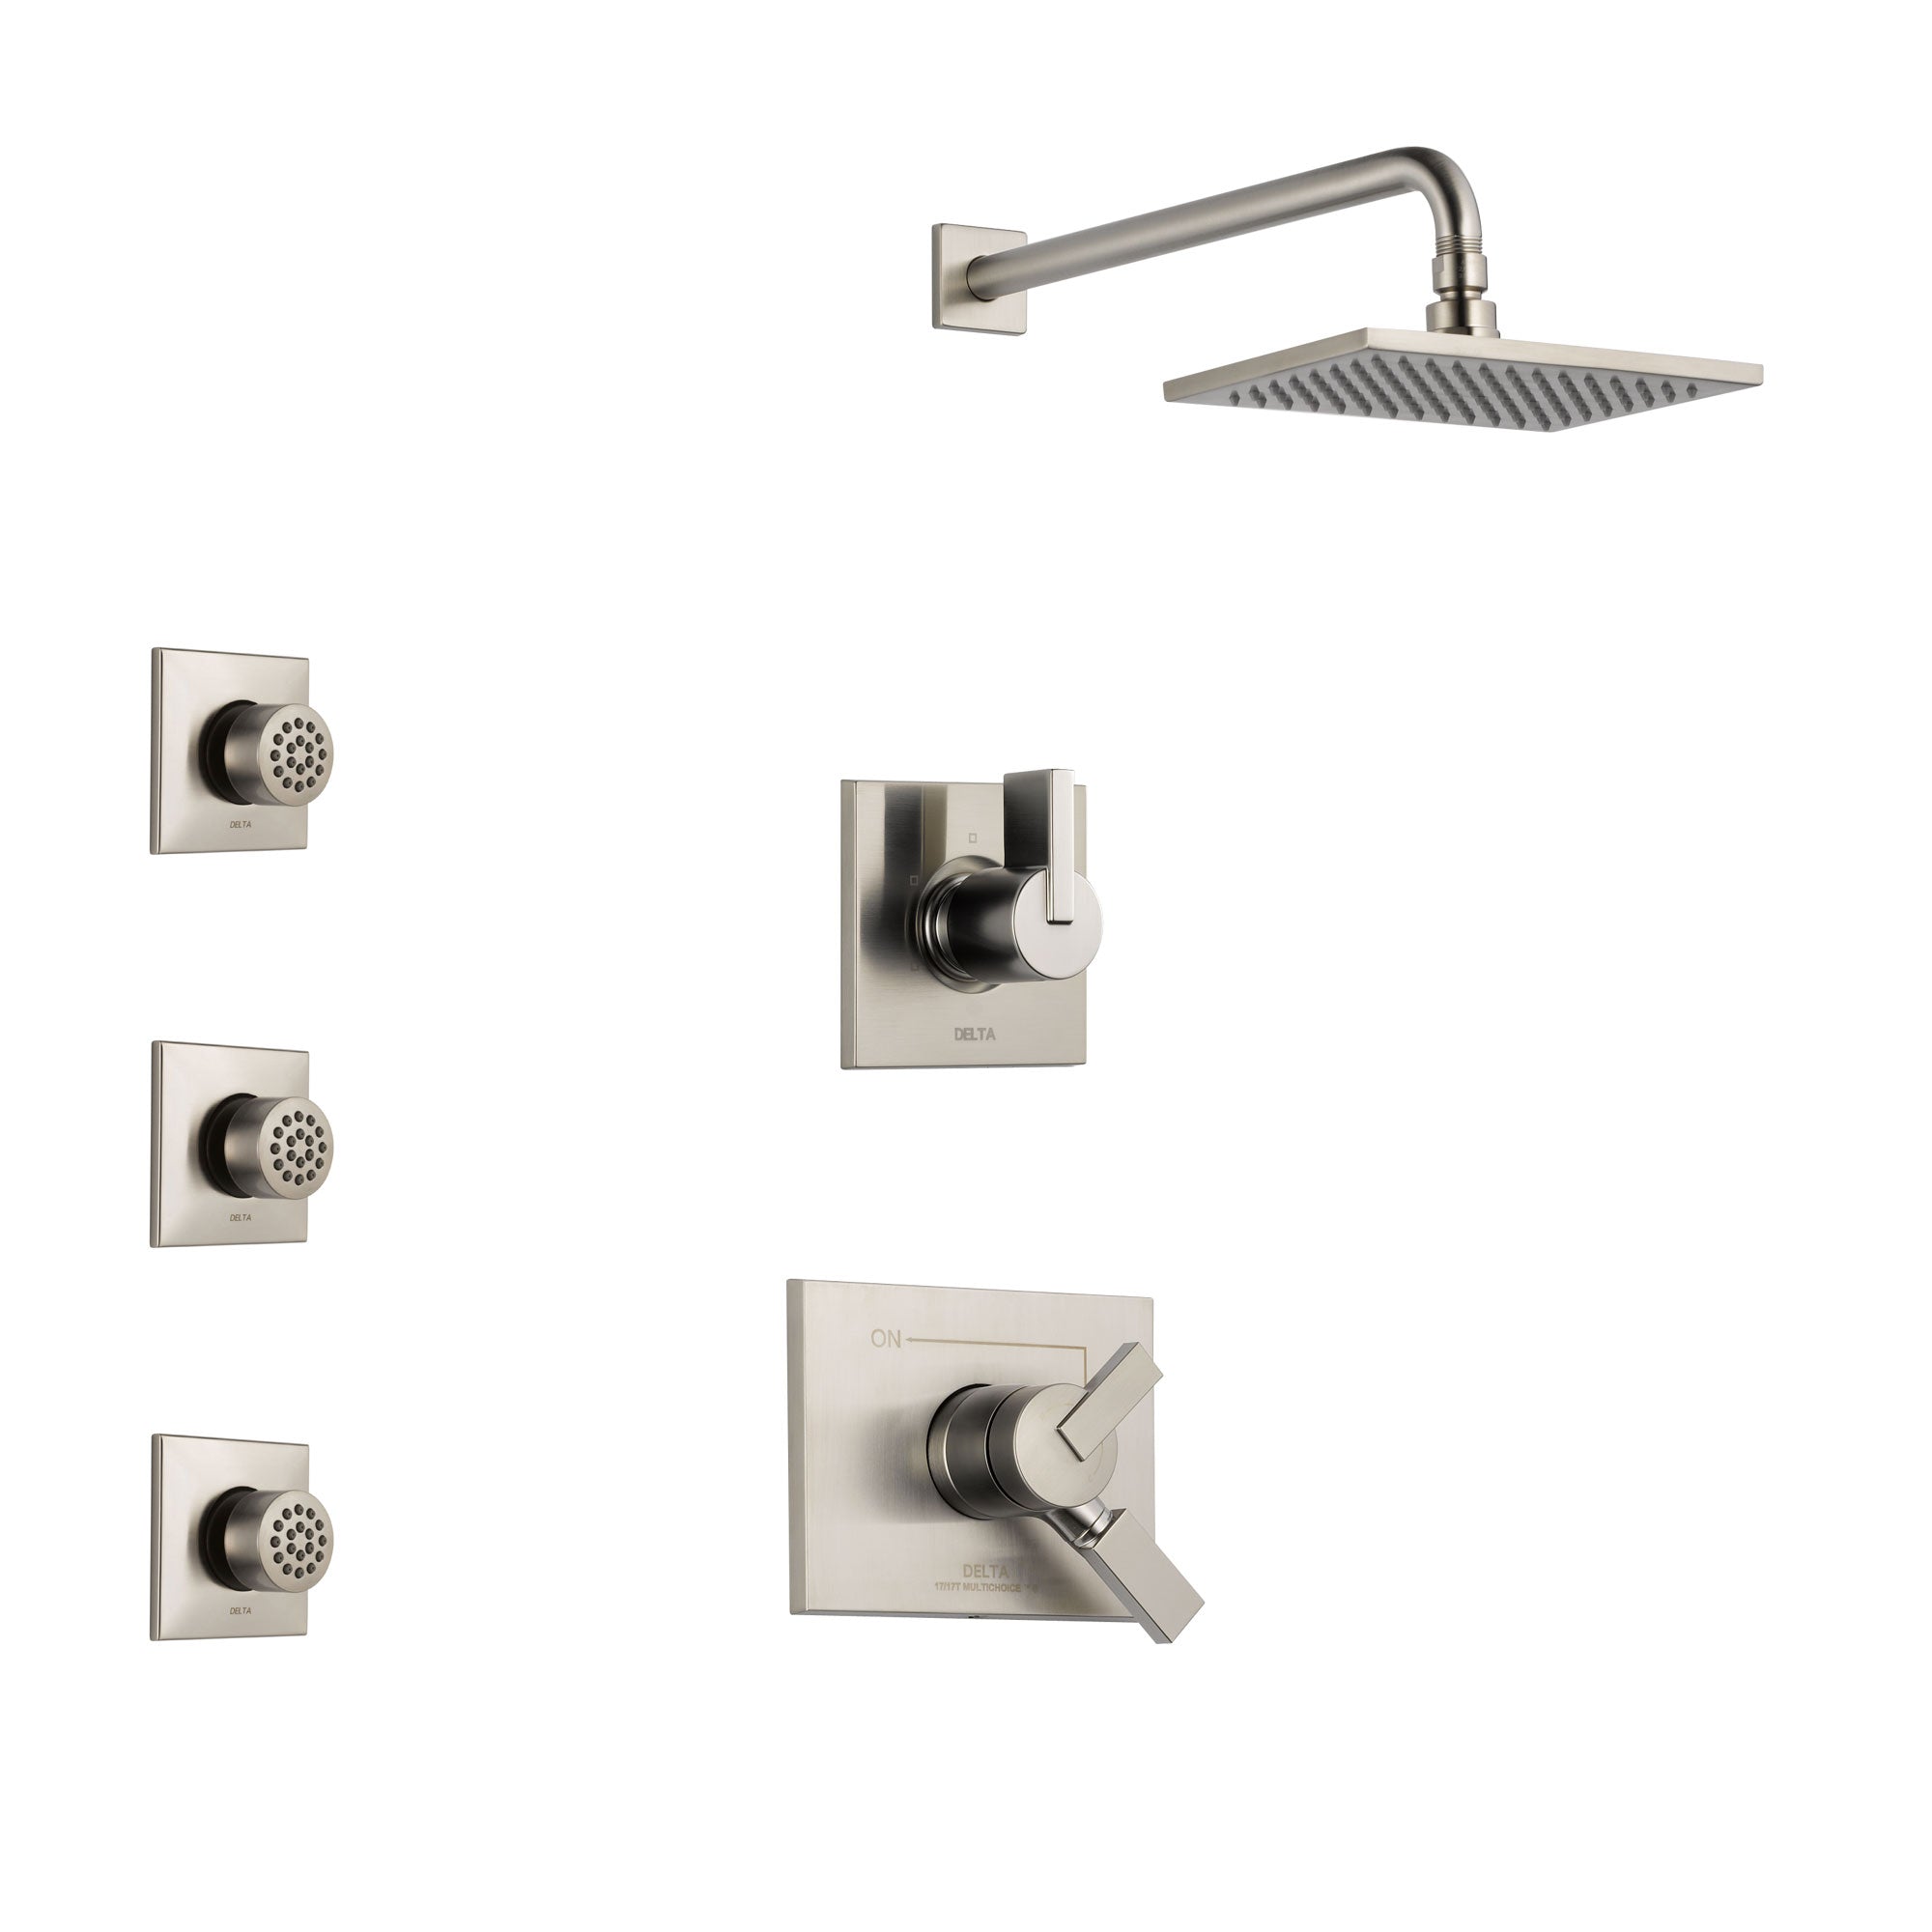 Delta Vero Stainless Steel Finish Shower System with Dual Control Handle, 3-Setting Diverter, Showerhead, and 3 Body Sprays SS172531SS2